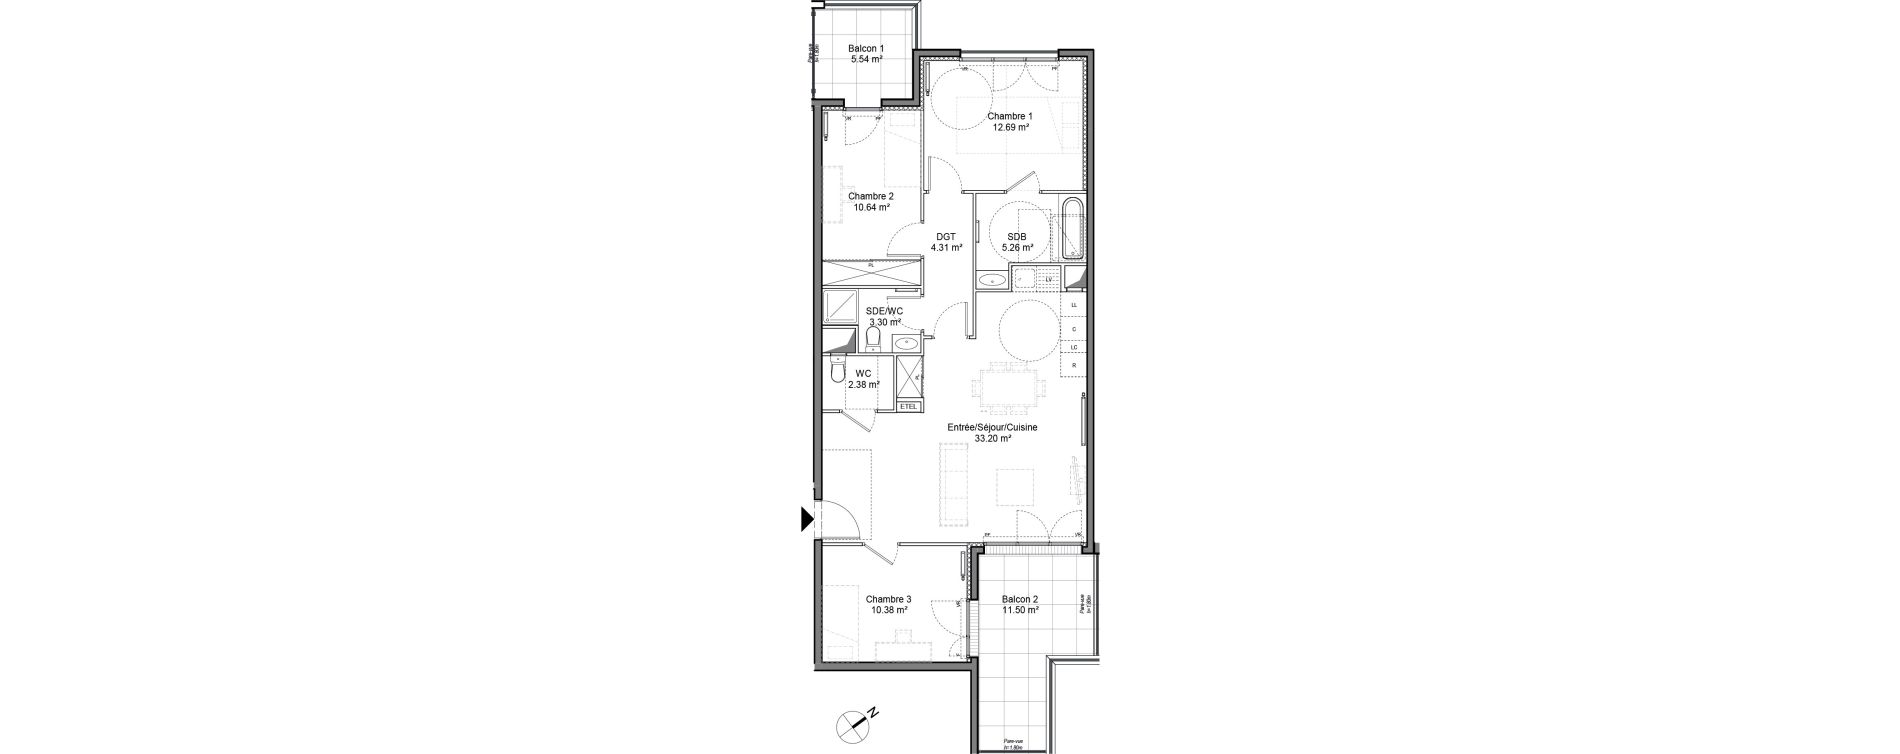 Appartement T4 de 82,41 m2 &agrave; Ch&acirc;tenay-Malabry Chatenay malabry voltaire